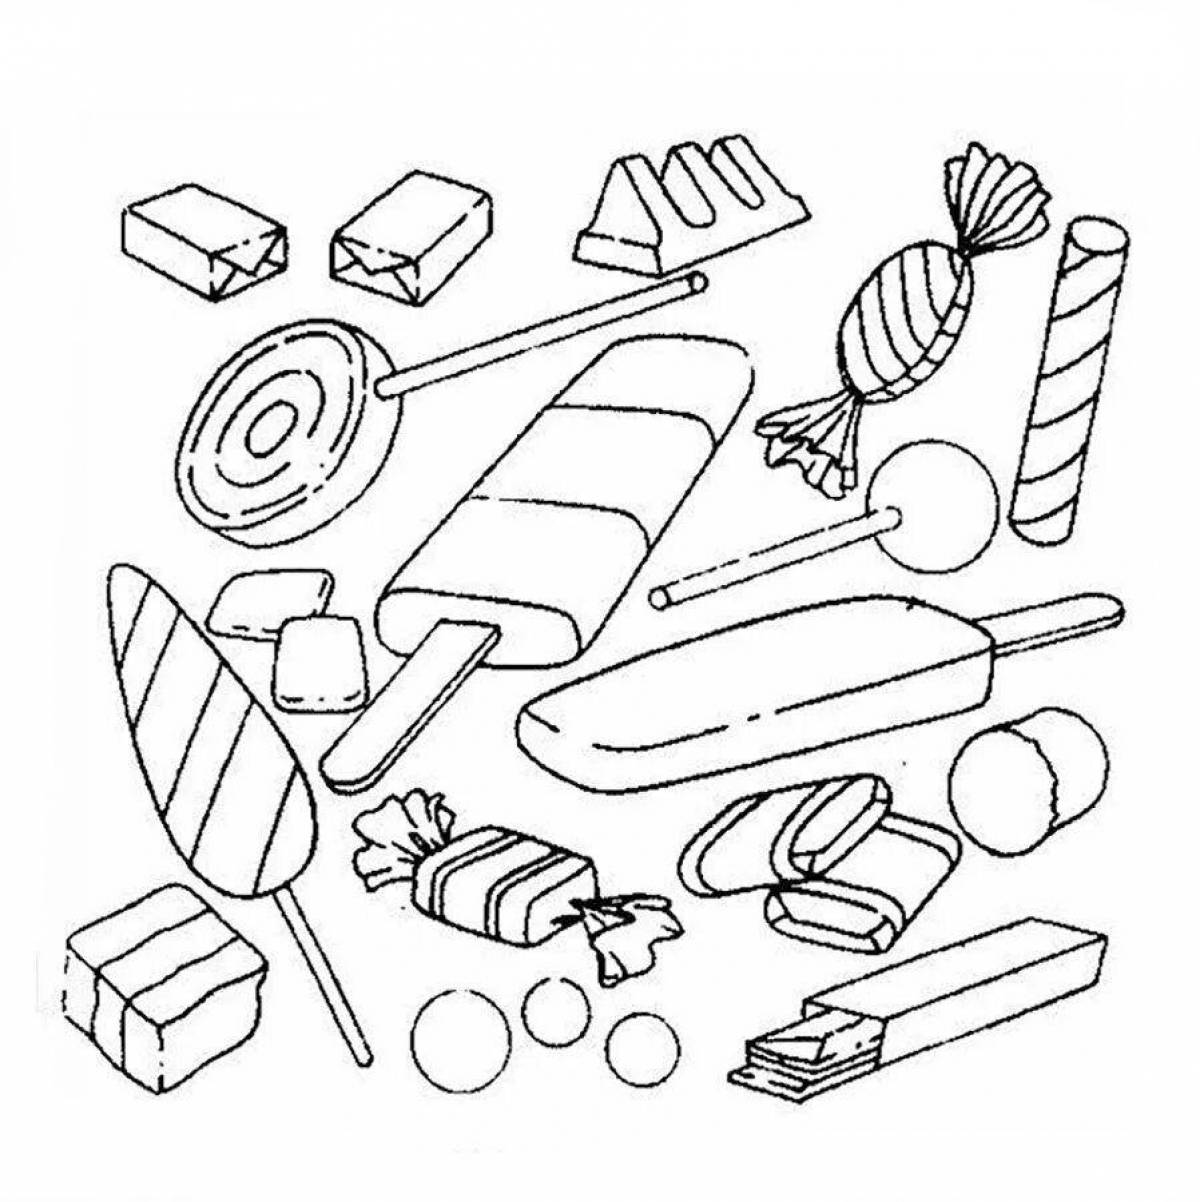 Coloring page of healthy food with fiber